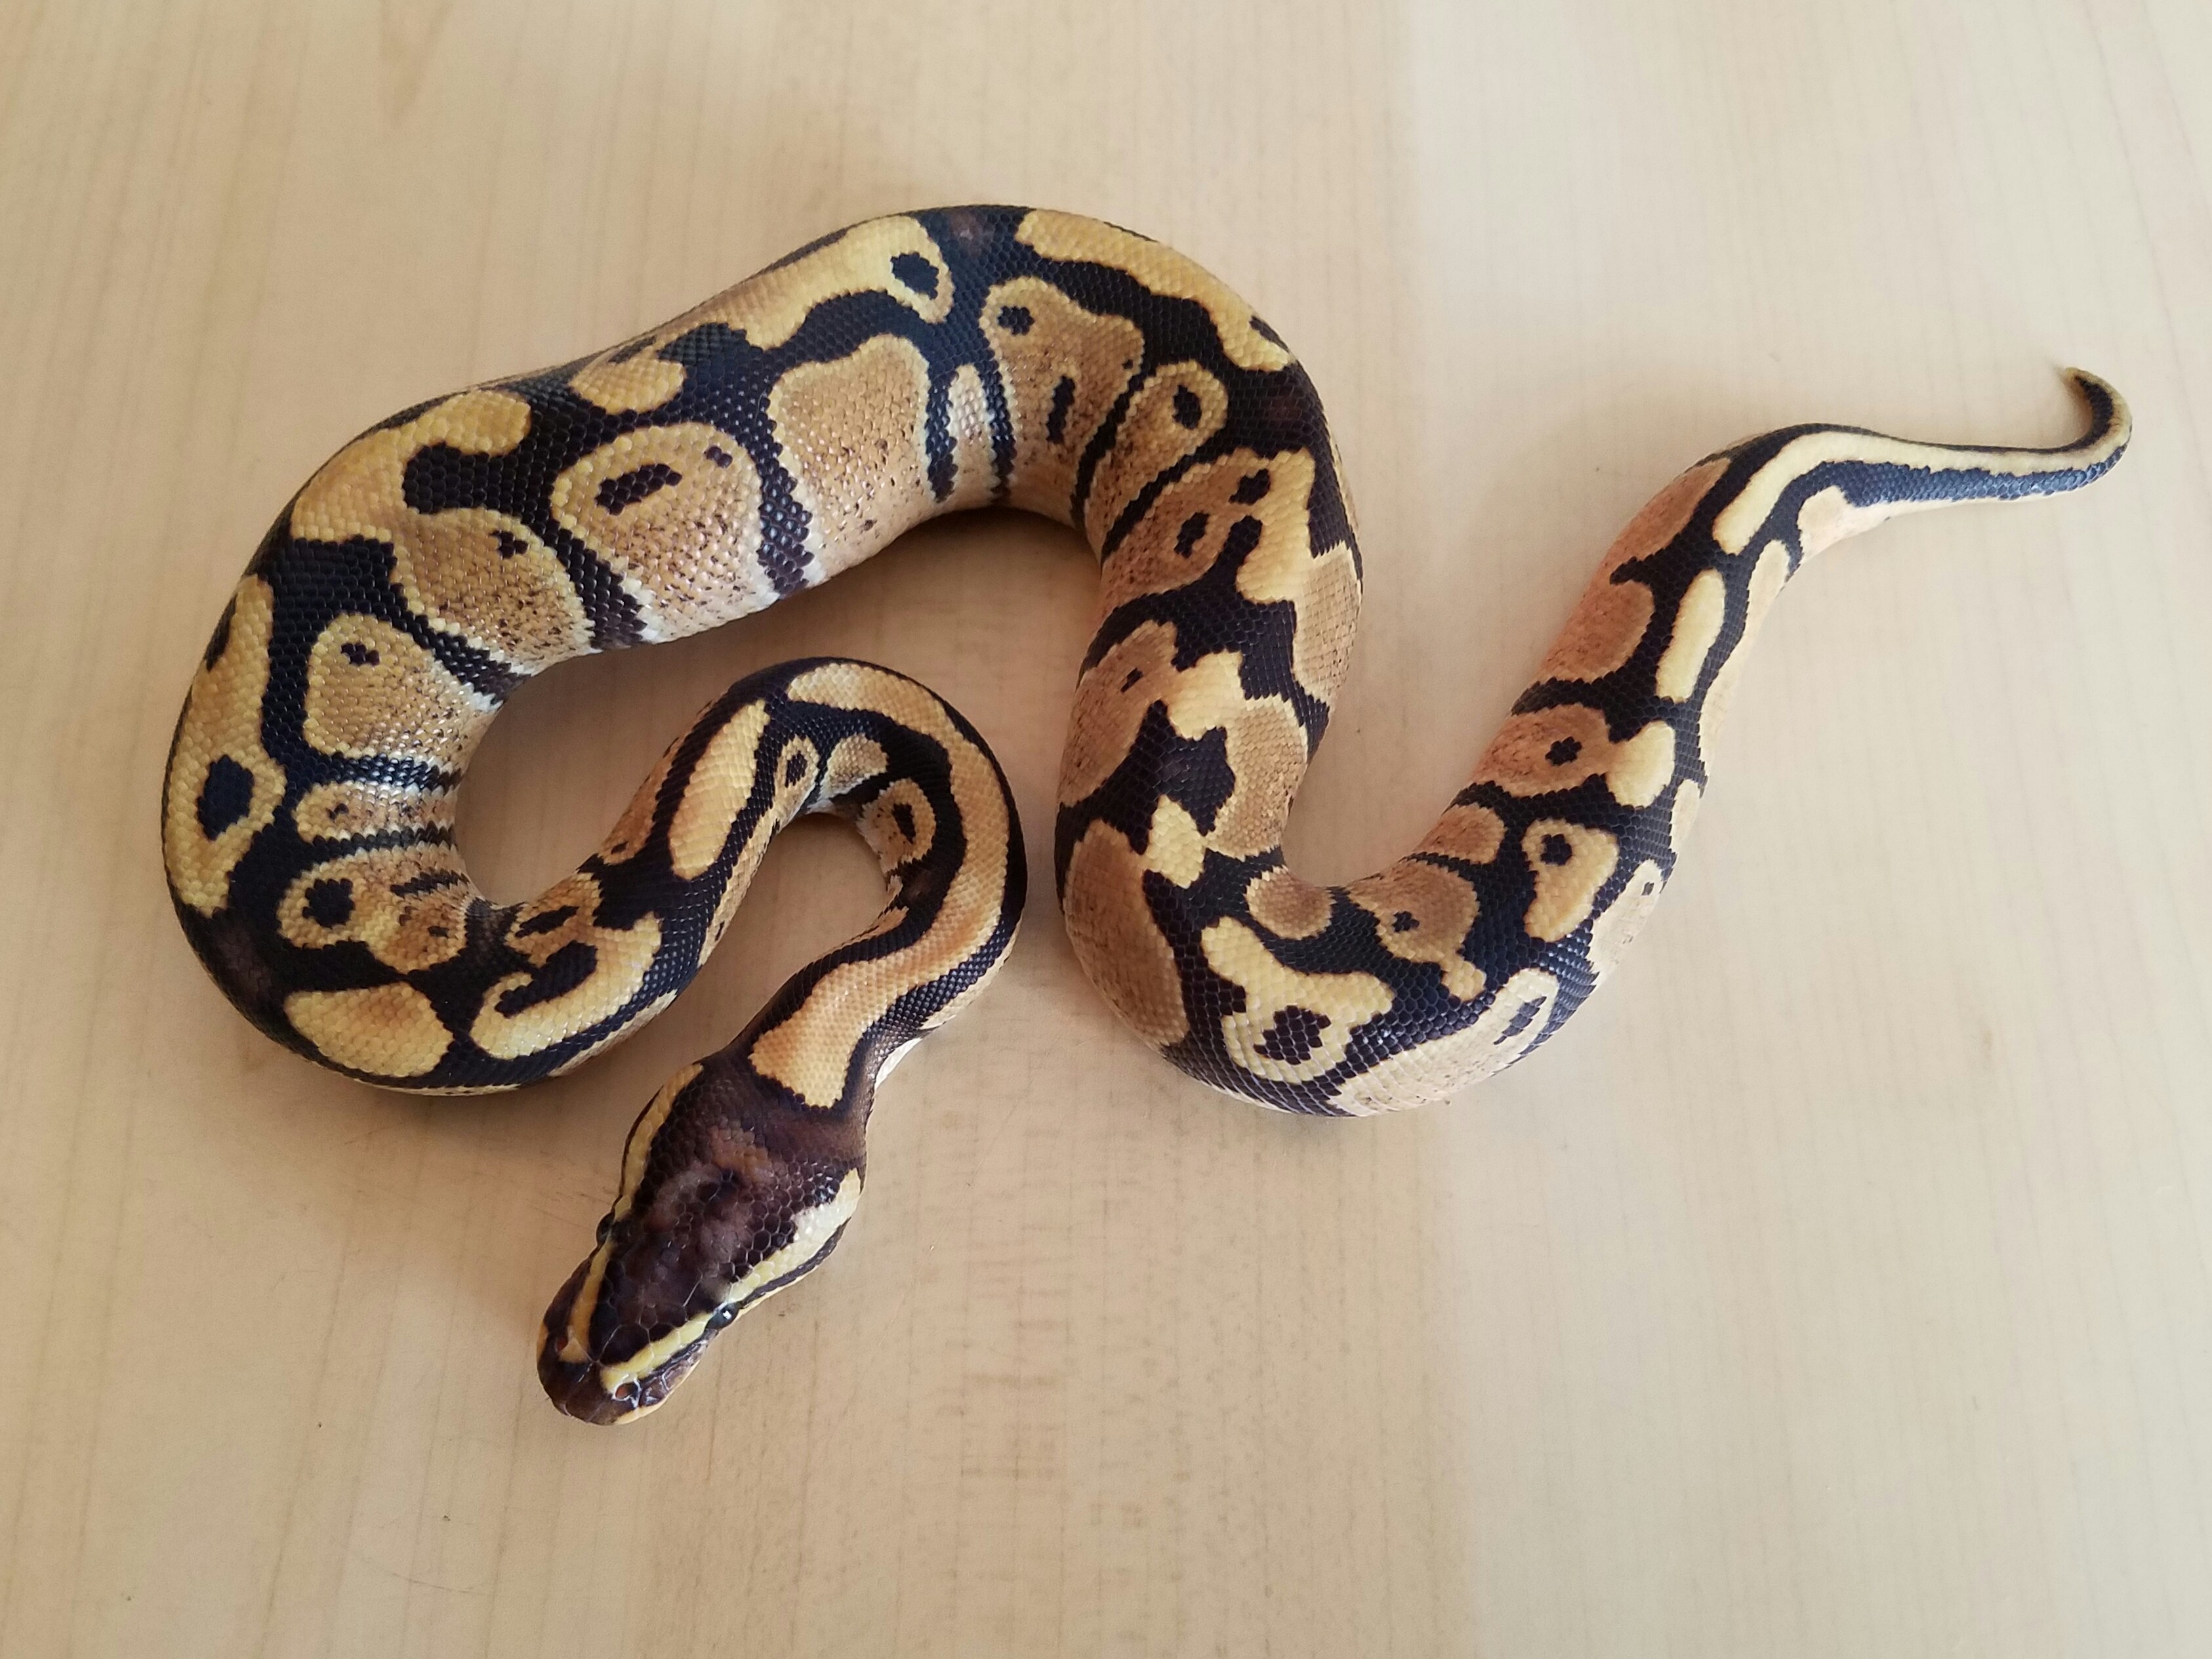 Flame Ball Python by Queen City Constrictors